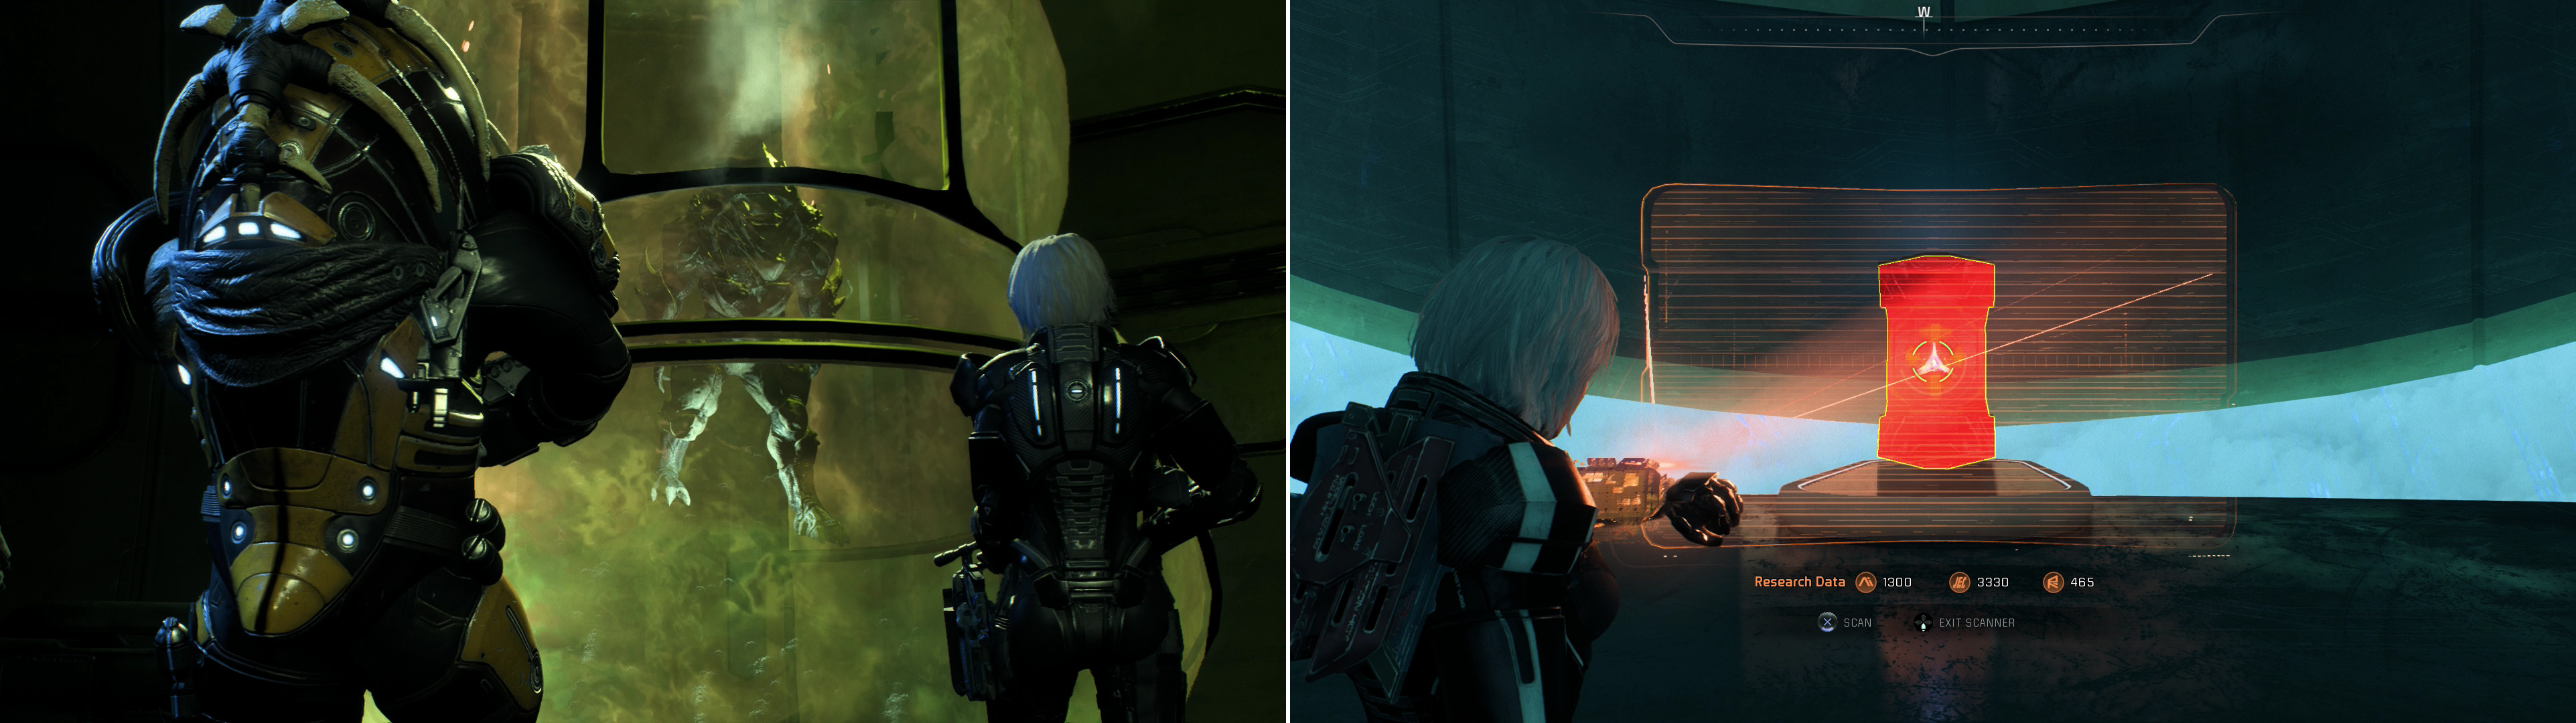 Near the Archon’s chamber you’ll find proof that the Kett have made dreadful progress towards exalting the Kett (left). There’s plenty of ruined Remnant artifacts in the Archon’s chamber, but you’re looking for an intact artifact, which holds the information you need (right).